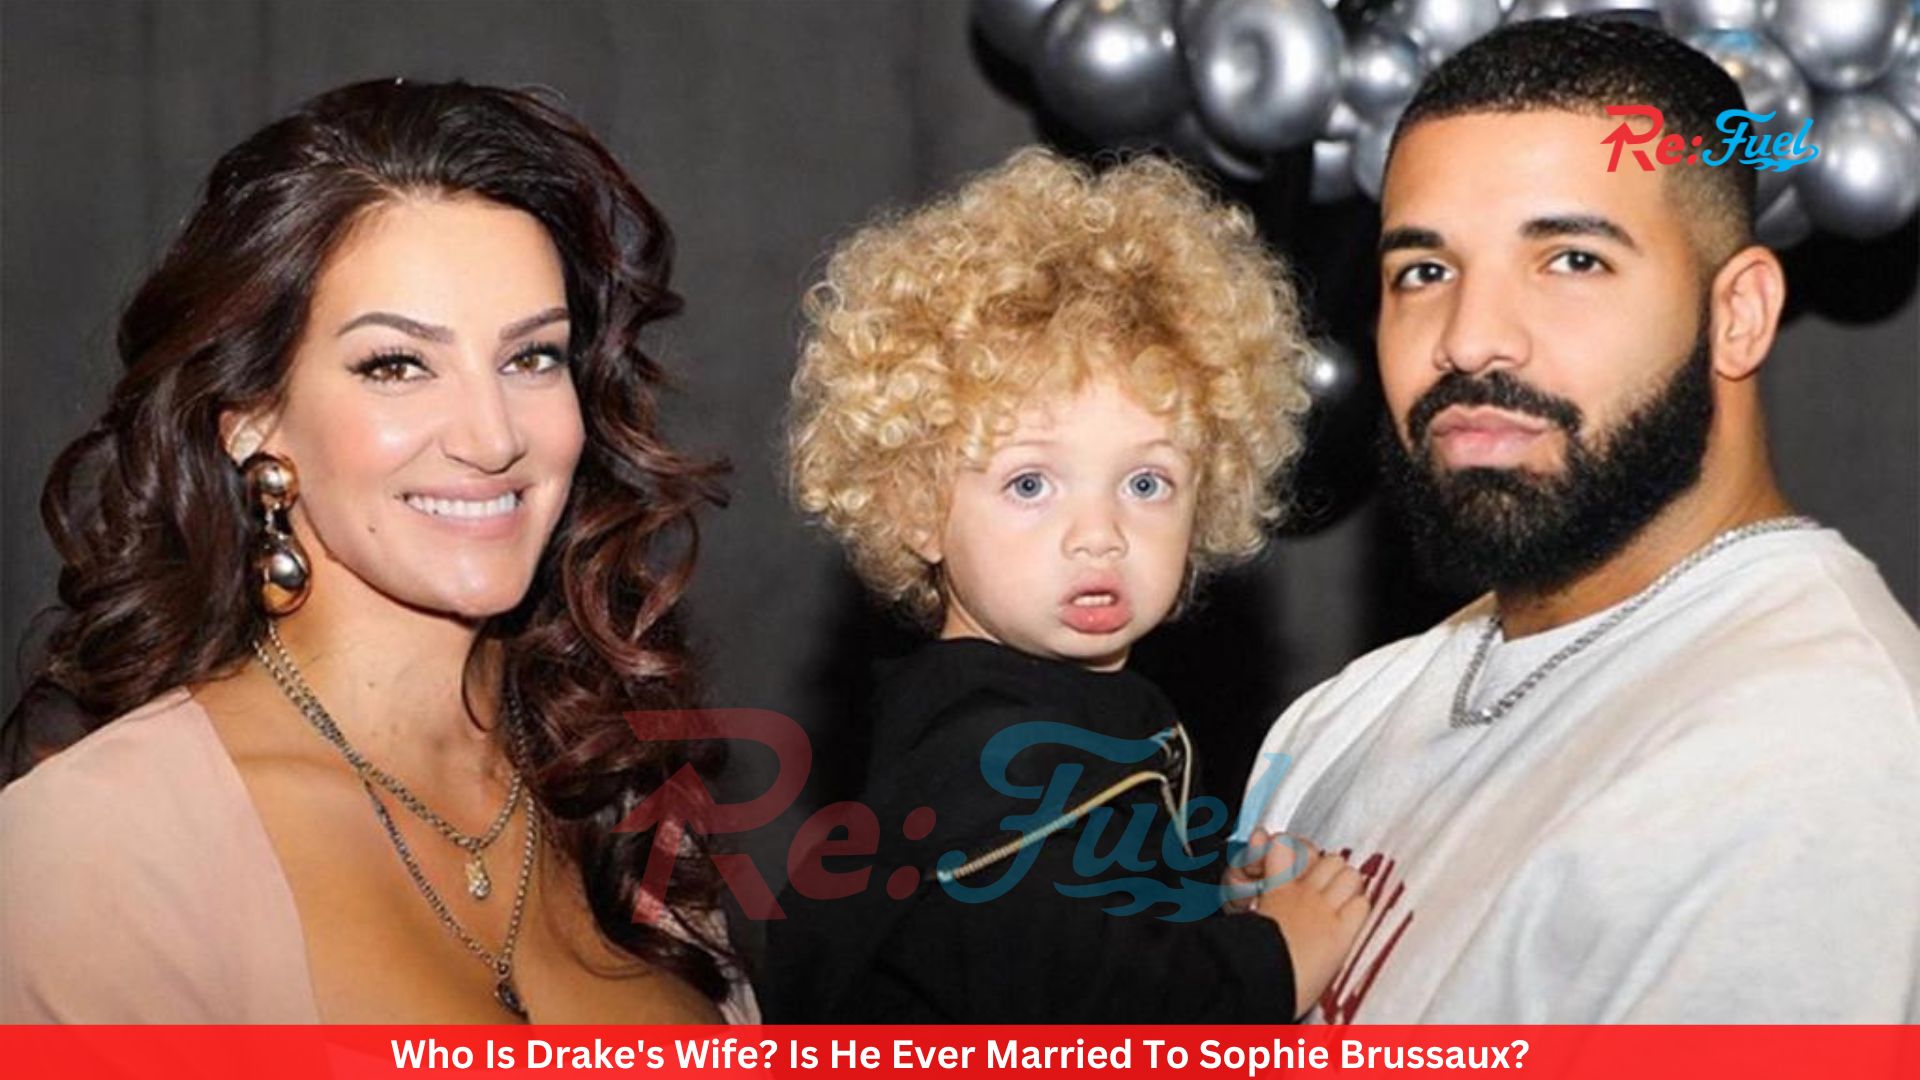 Who Is Drake's Wife? Is He Ever Married To Sophie Brussaux?